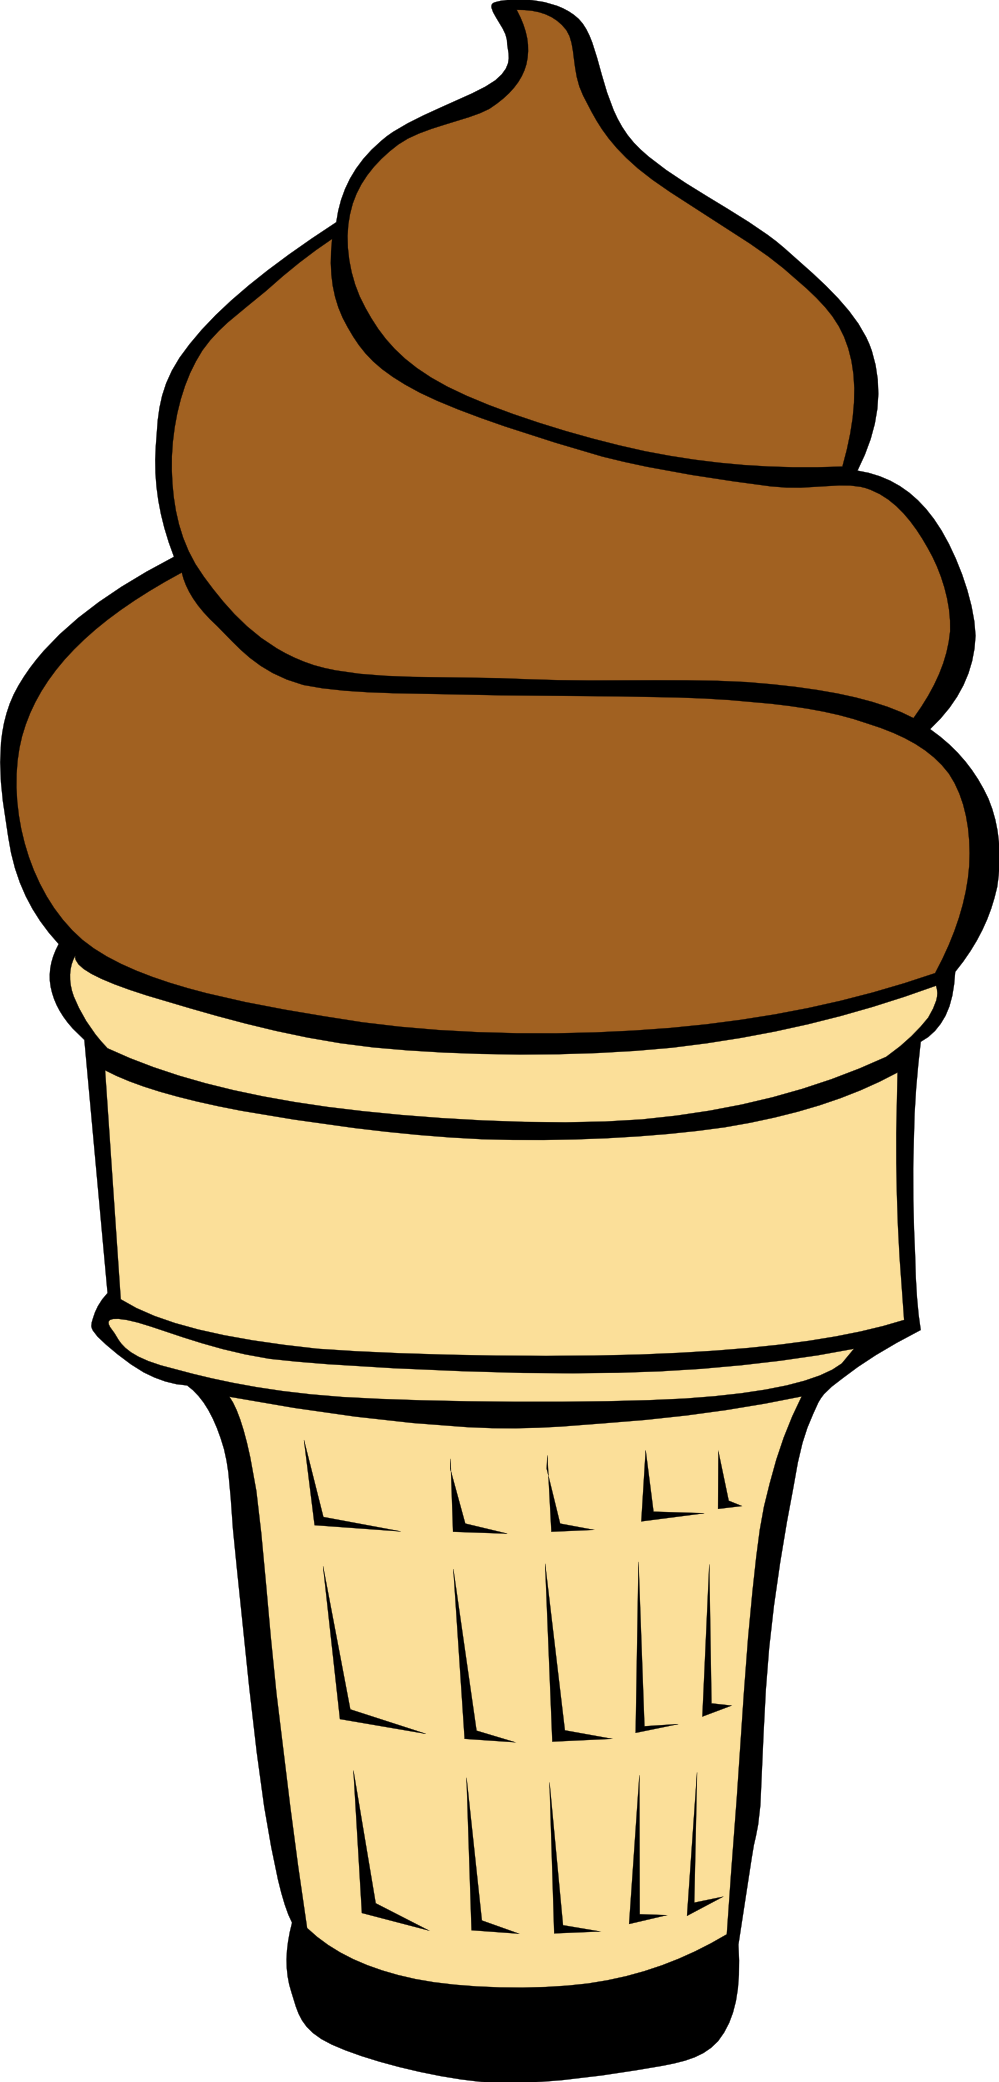 Empty Ice Cream Cone Clipart | Clipart Panda - Free Clipart Images